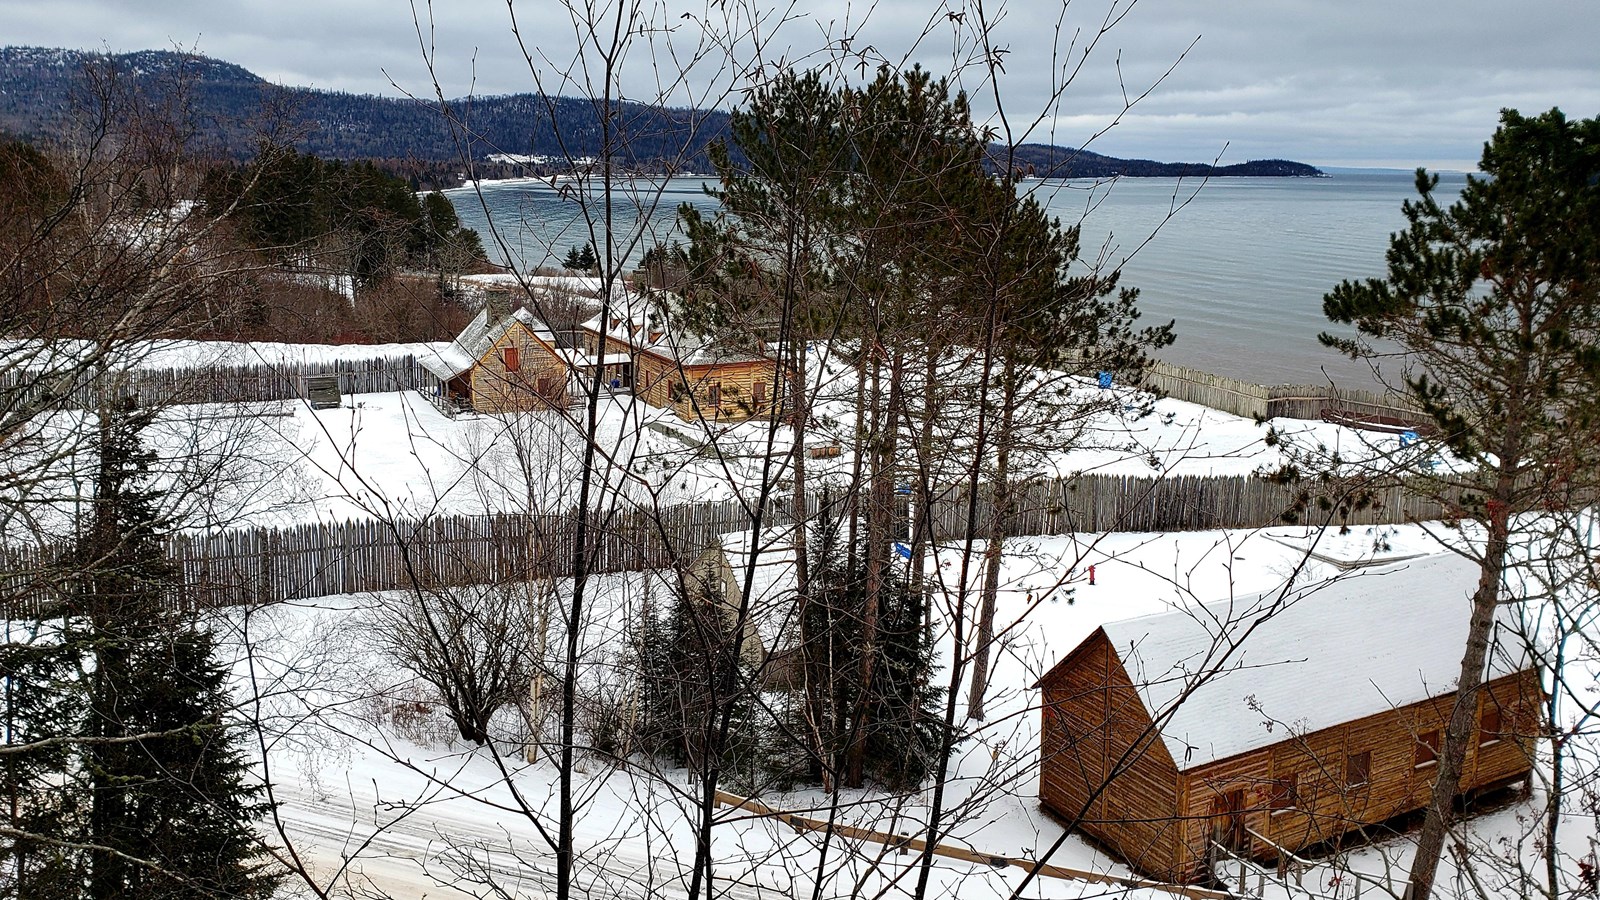 View from a mountain trail of wood buildings in the snow with a lake in the background.